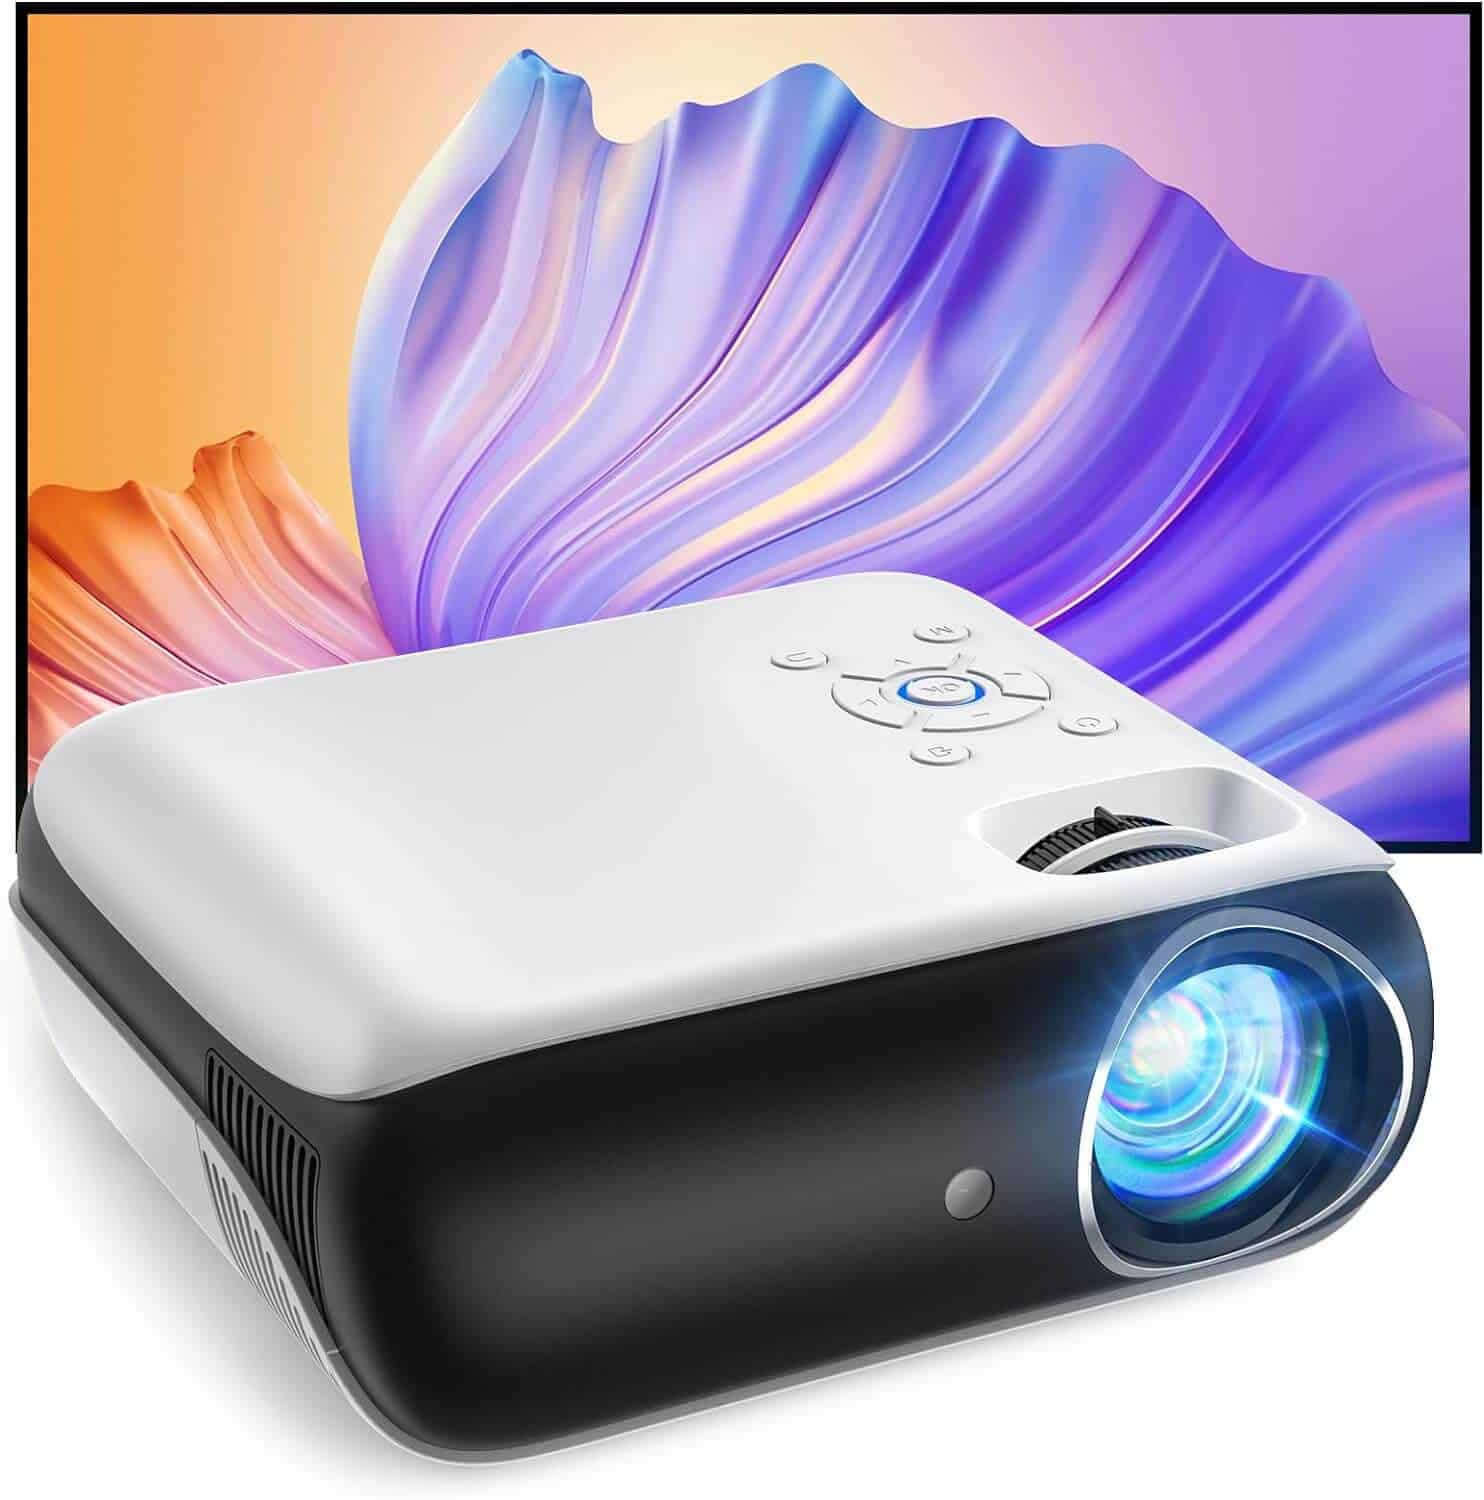 HD smartphone projector with 1920*1080 native resolution, which is 4k supported. Equipped with excellent brightness and 10000:1 high dynamic contrast ratio, the hd projector provides sharper, brighter, and richer images